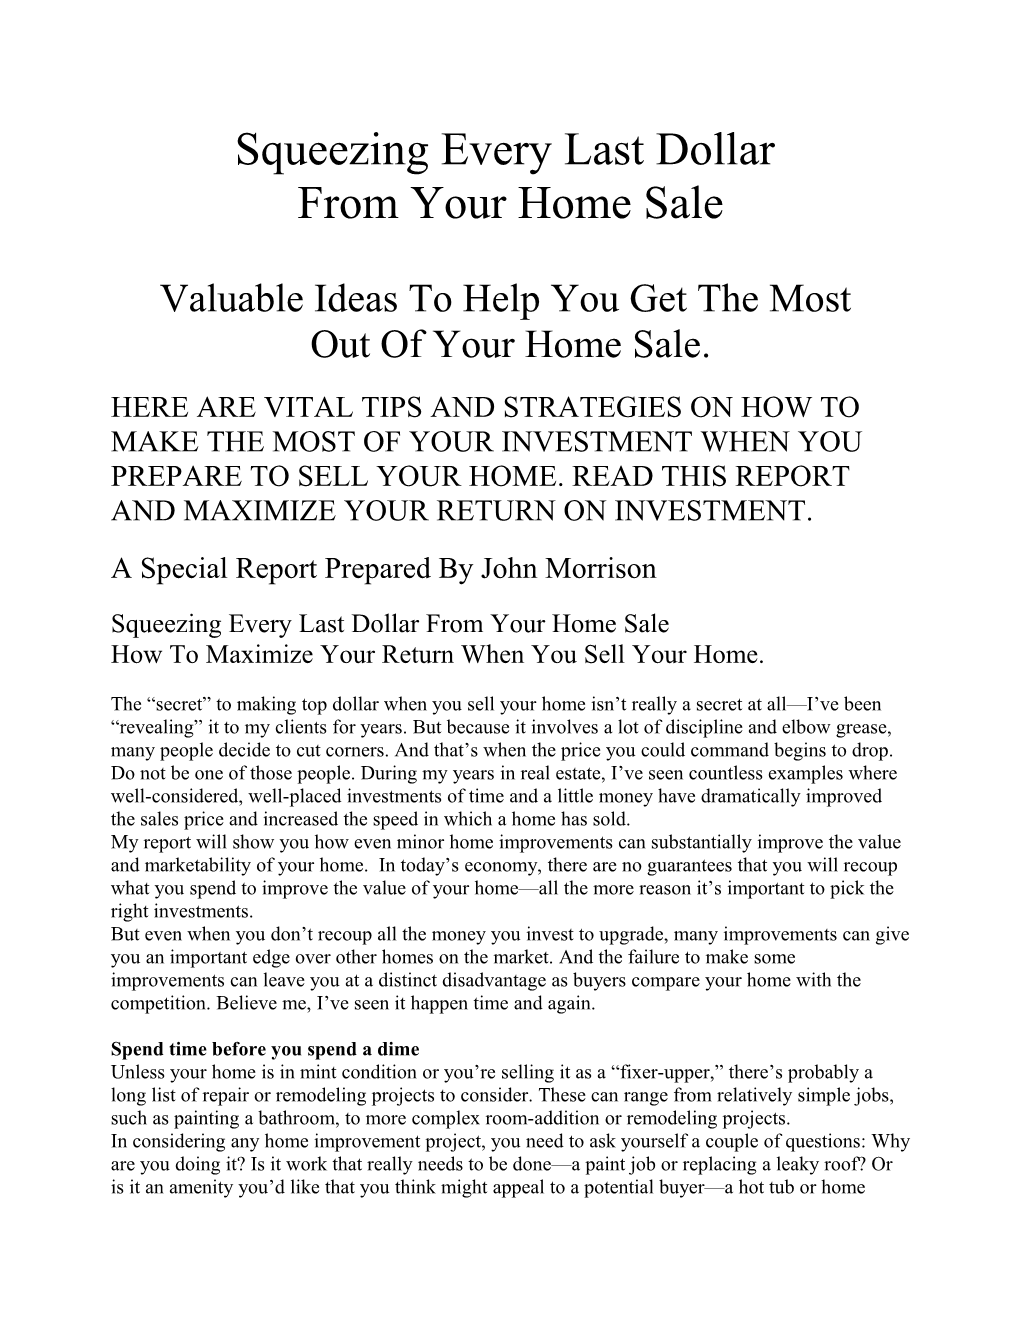 Squeezing Every Last Dollar from Your Home Sale